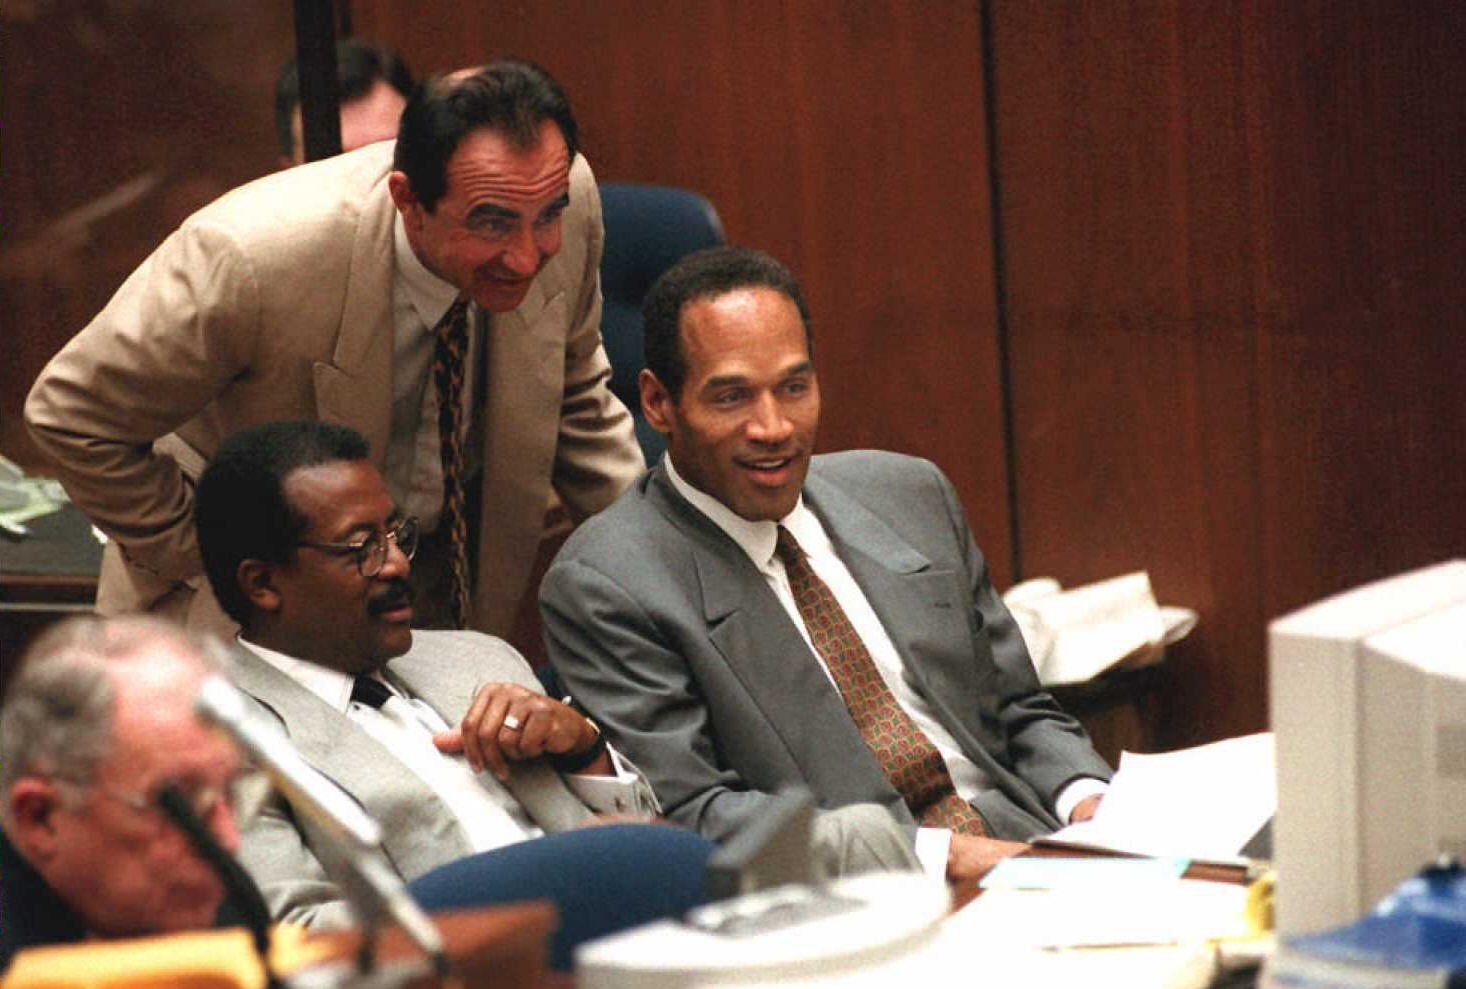 O.J. Simpson (C) smiles with his attorneys Robert Shapiro (standing) and Johnnie Cochran Jr as they view a video tape on February 6 | Source: Getty Images